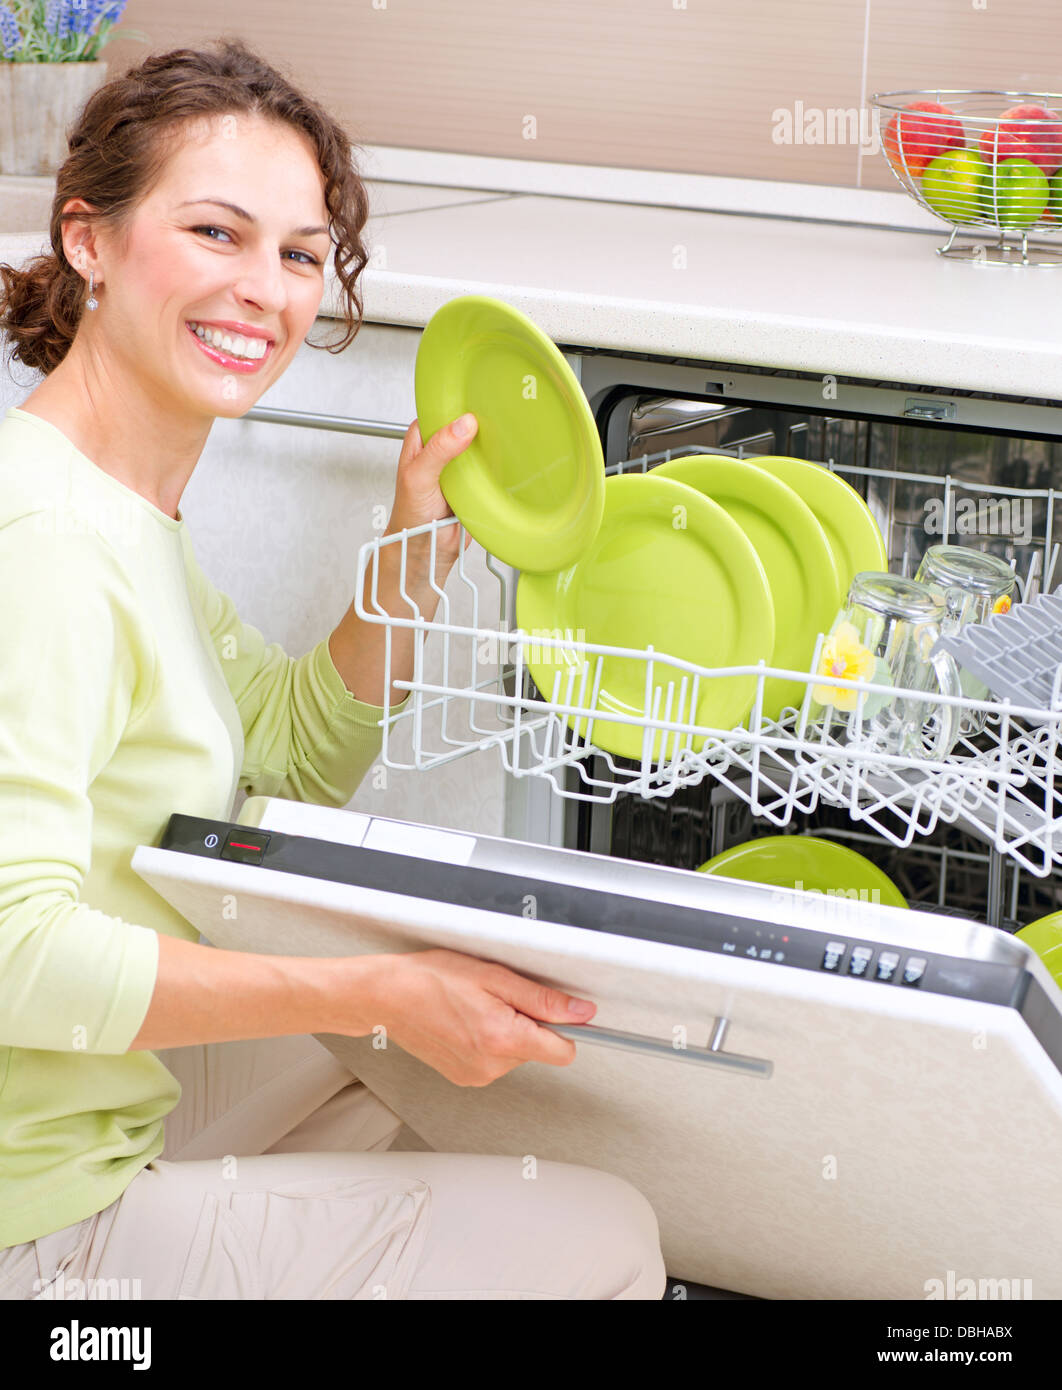 Dishwasher. Young woman in the Kitchen doing Housework. Wash-up Stock Photo